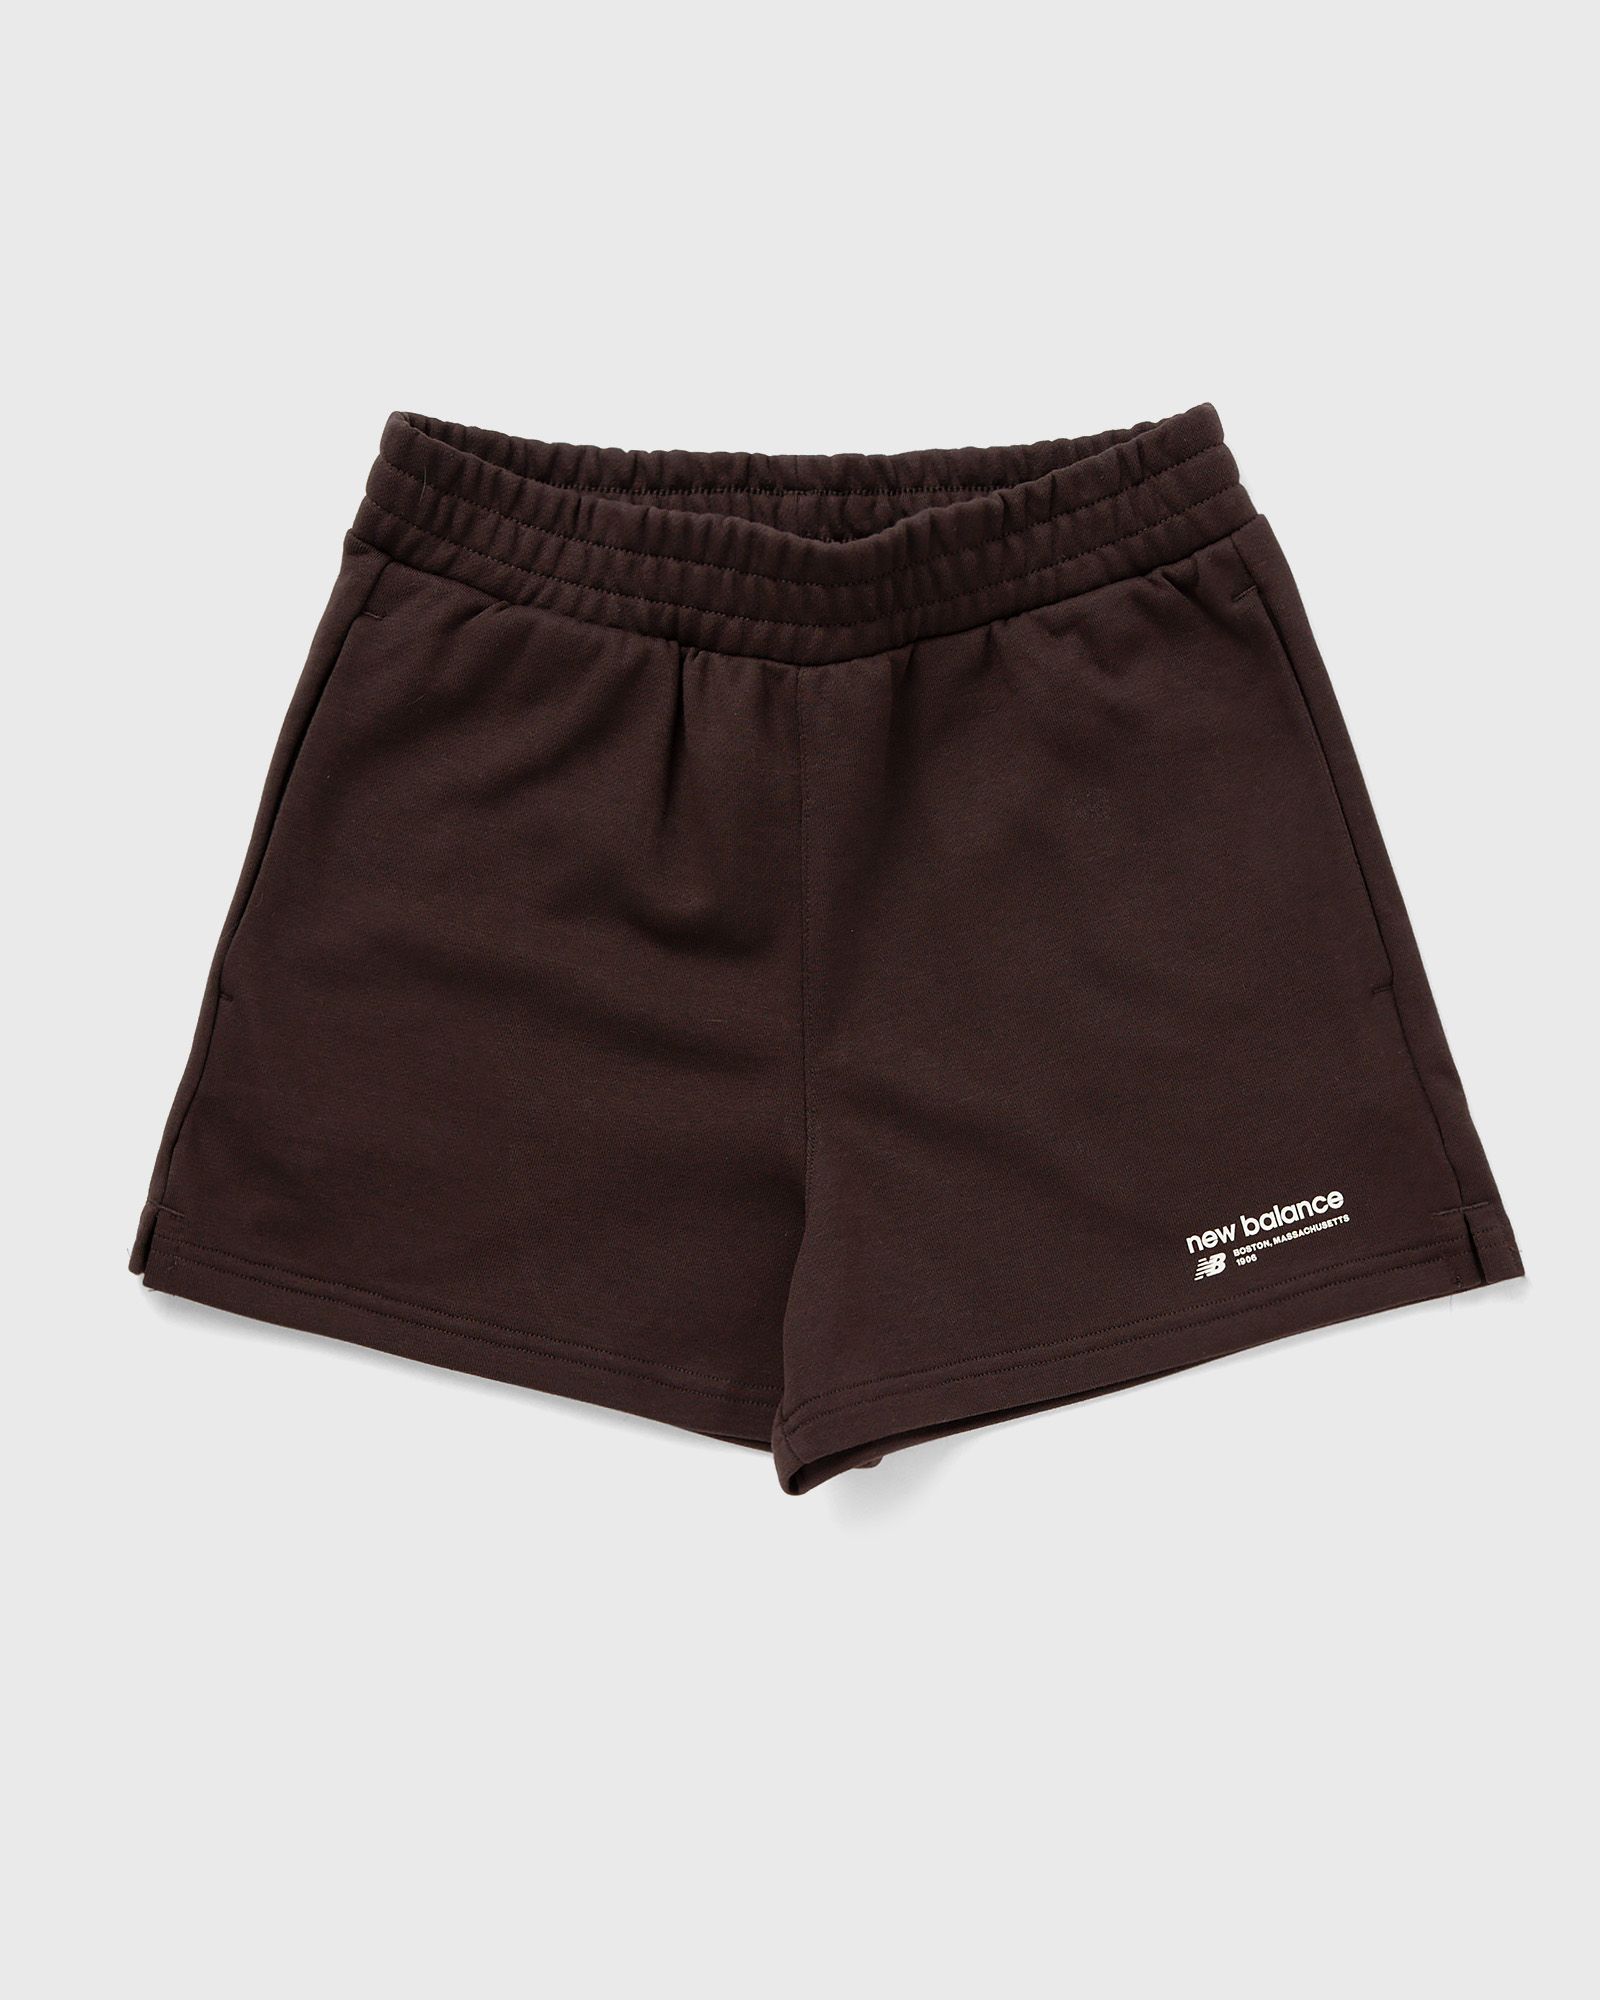 New Balance - linear heritage french terry short women casual shorts brown in größe:xs